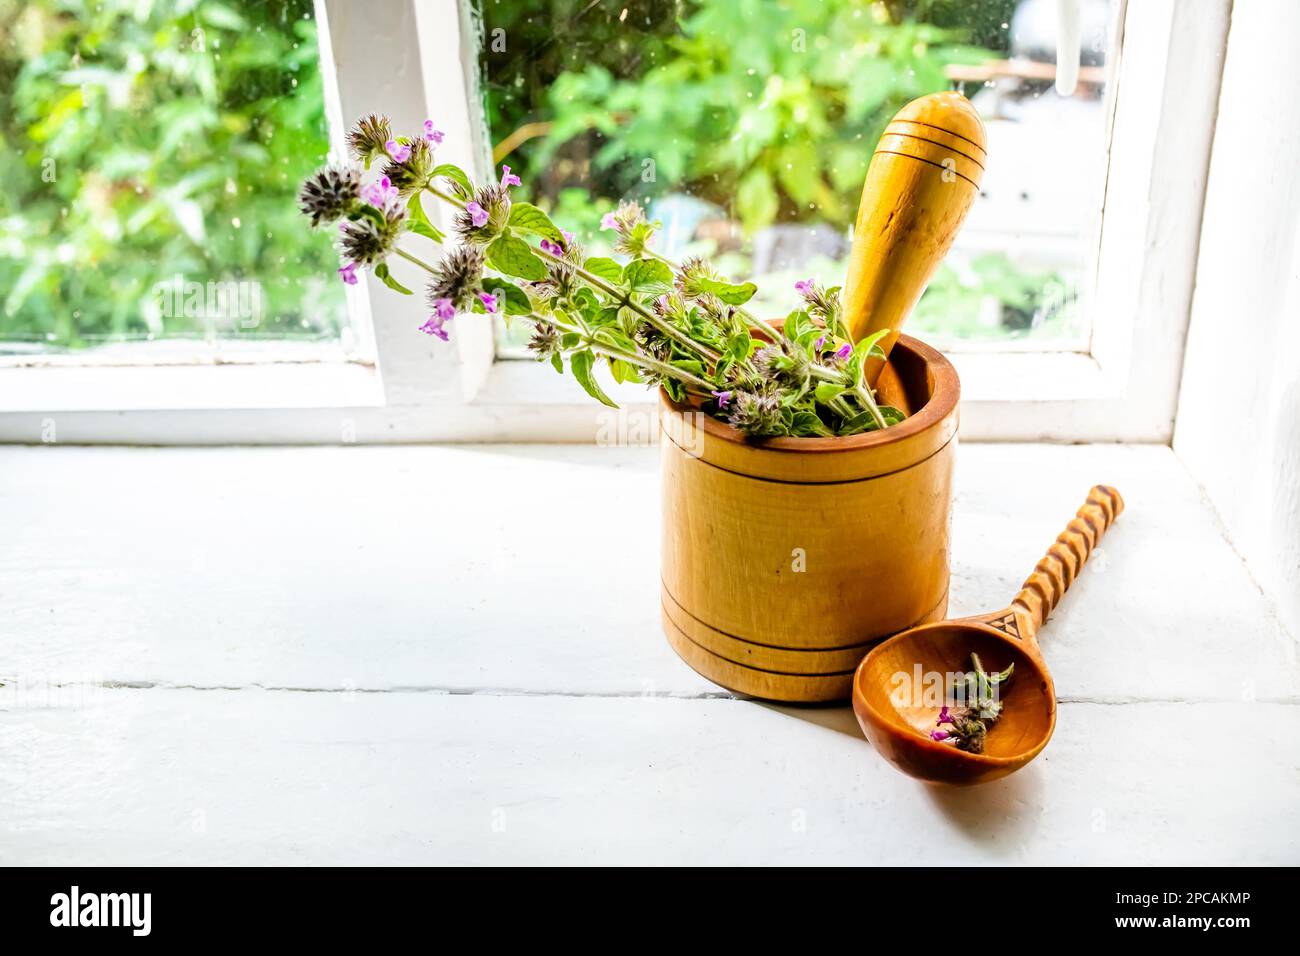 Still life with a bouquet of flowering Gemeiner Wirbeldost, Clinopodium vulgare, wild basil on an old vintage windowsill with wooden frames Stock Photo